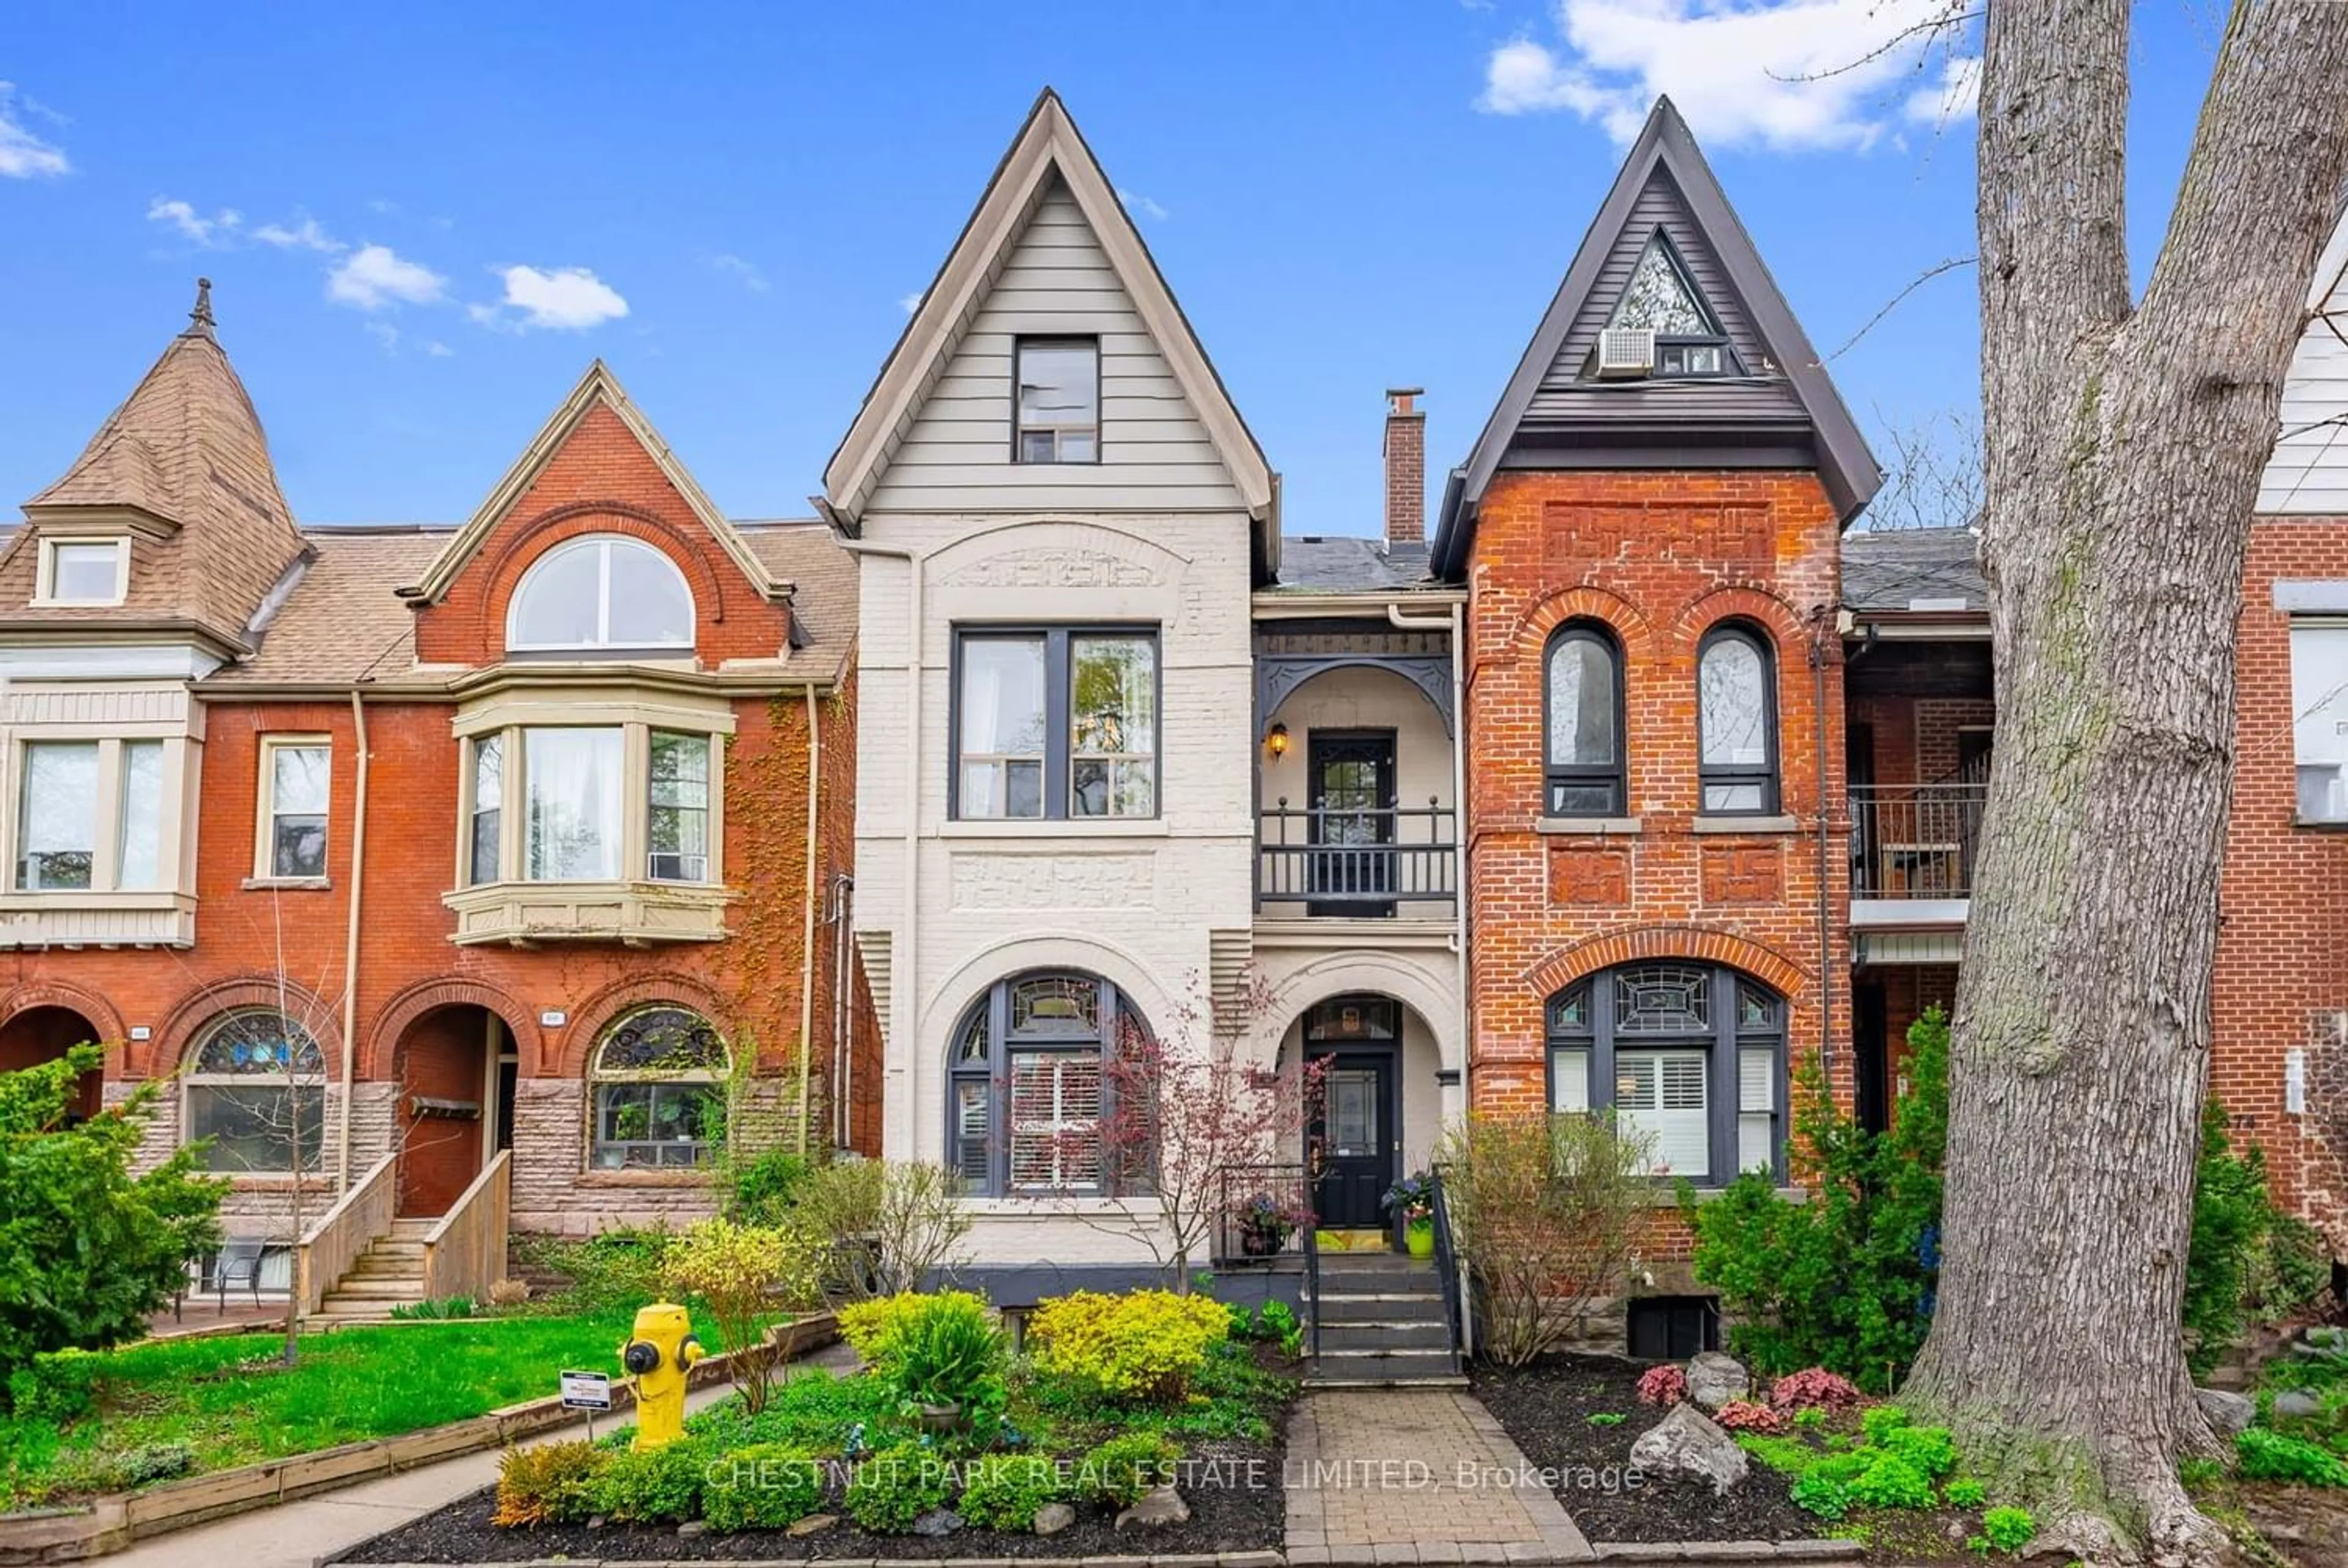 Home with brick exterior material for 670 Euclid Ave, Toronto Ontario M6G 2T7